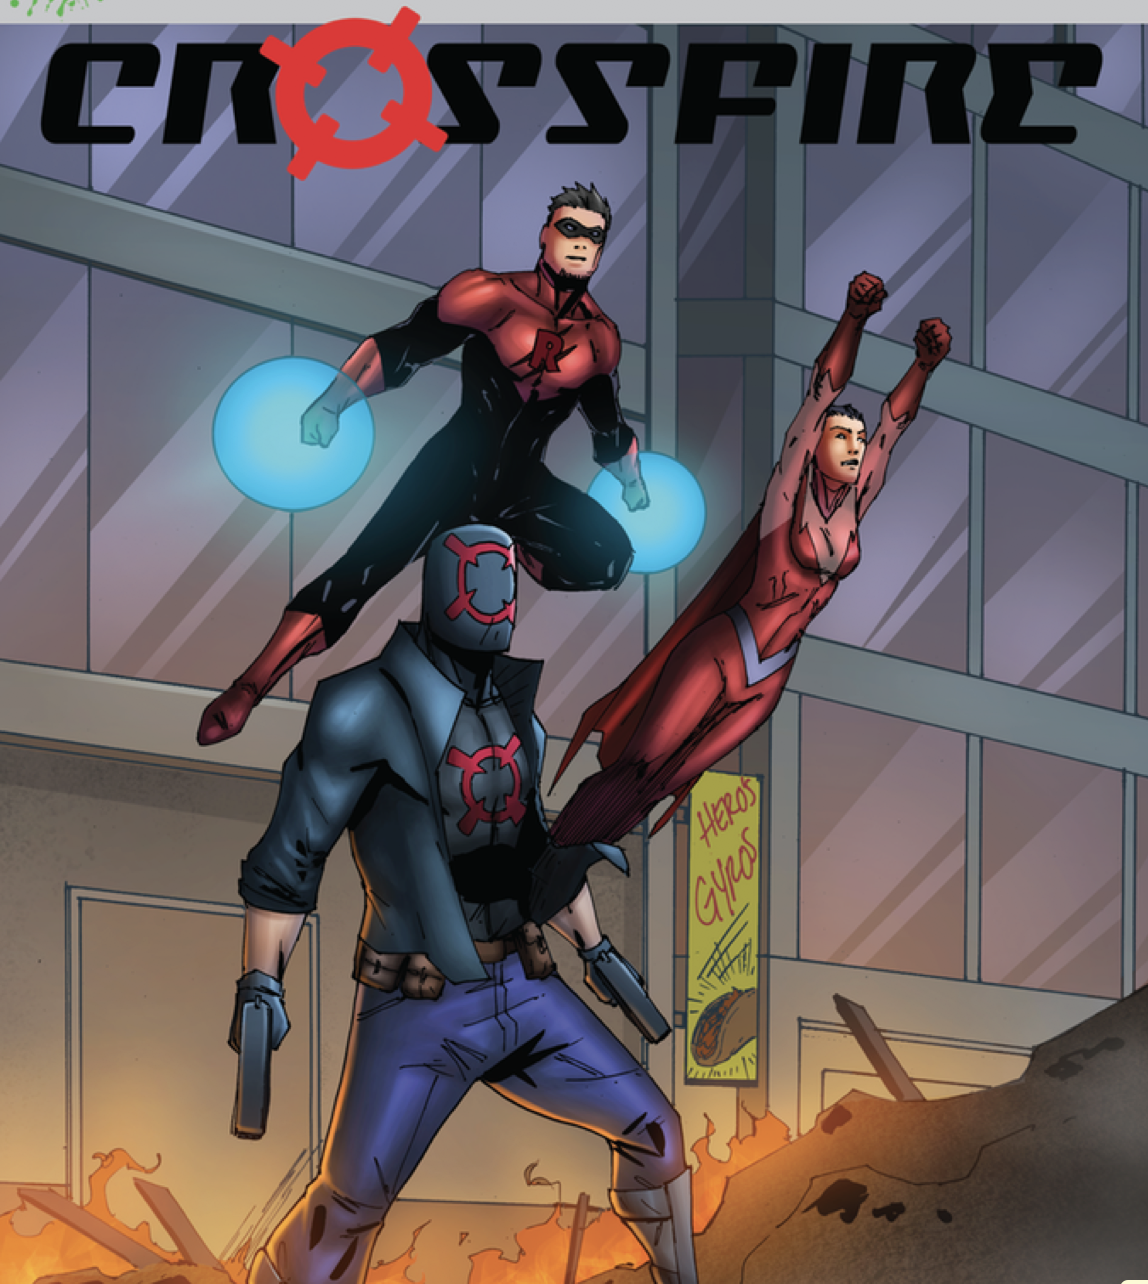 The story of a mercenary and his team of heroes as they battle crime in Crossfire Issue #2!  .  .  .